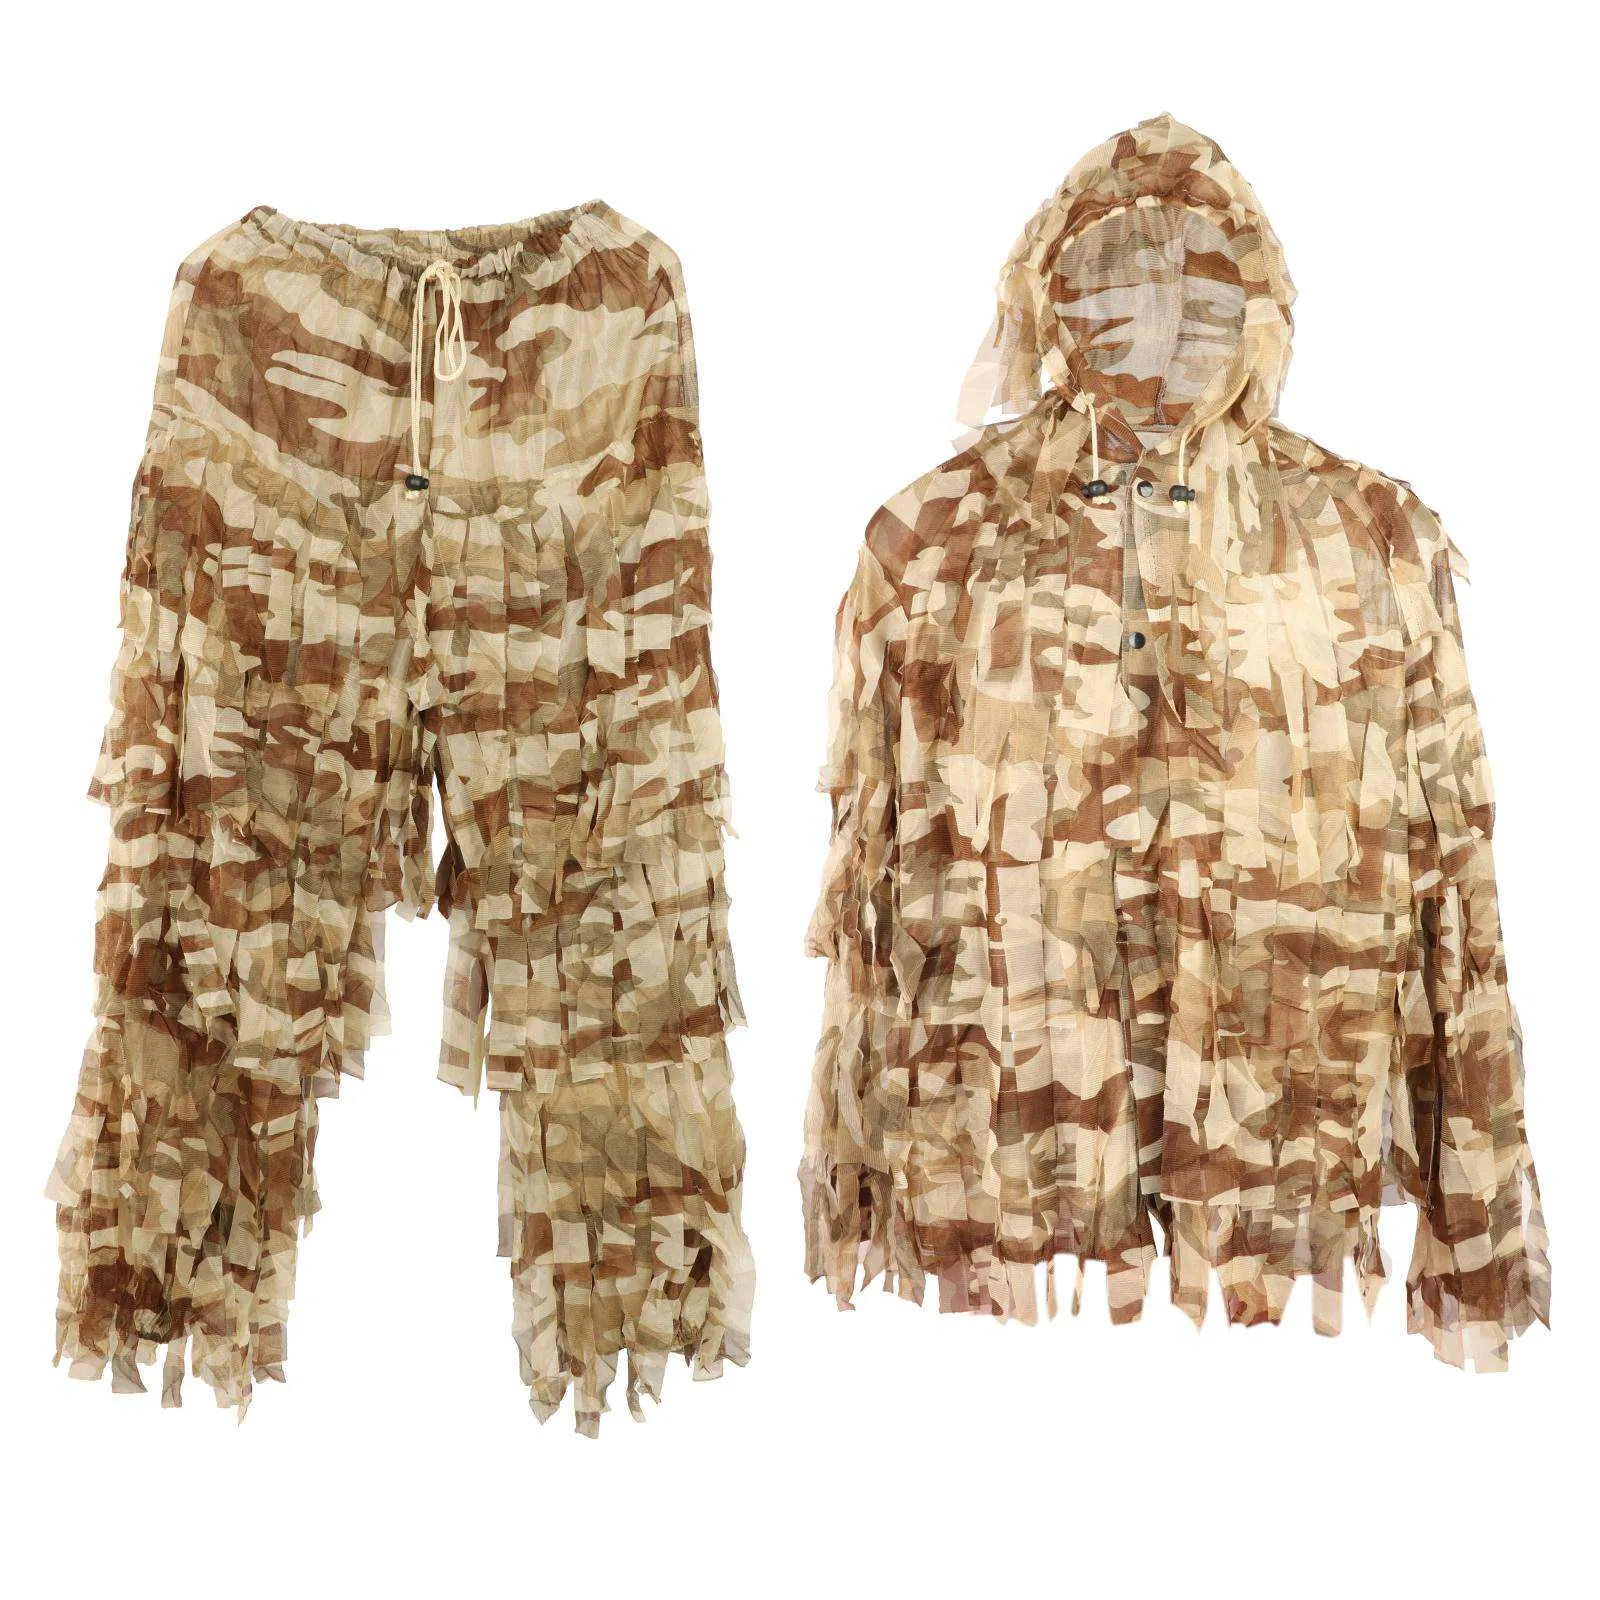 3D Ghillie Suit Lightweight, Breathable Camouflage for Hunting, Outdoor